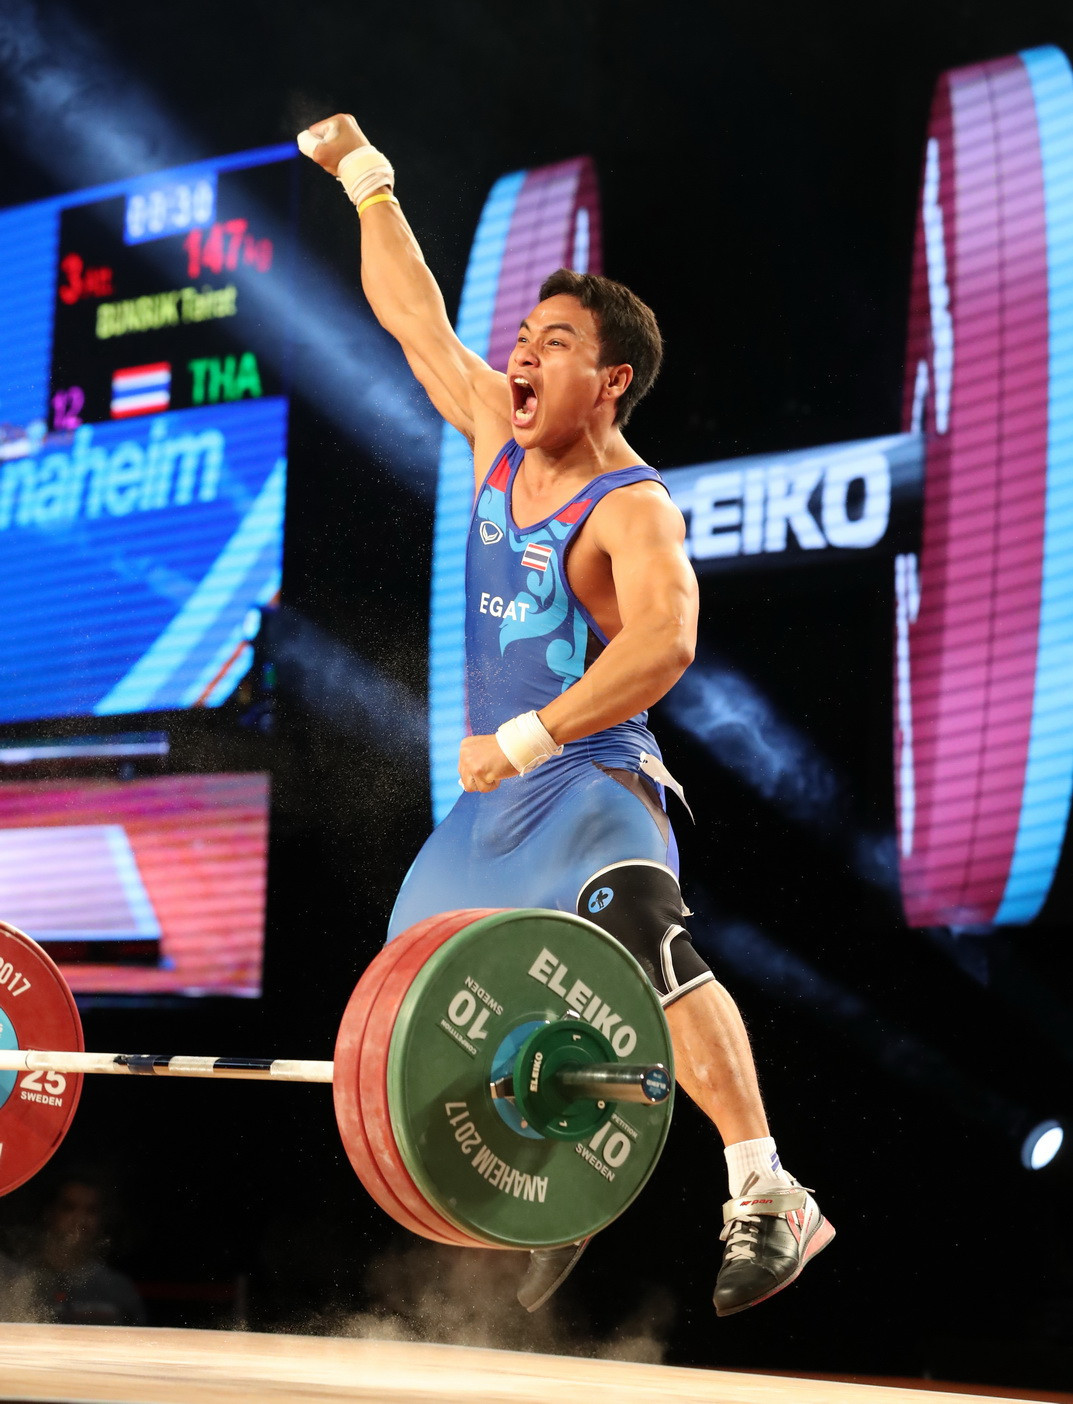 His successful lifts sparked wild celebrations ©IWF